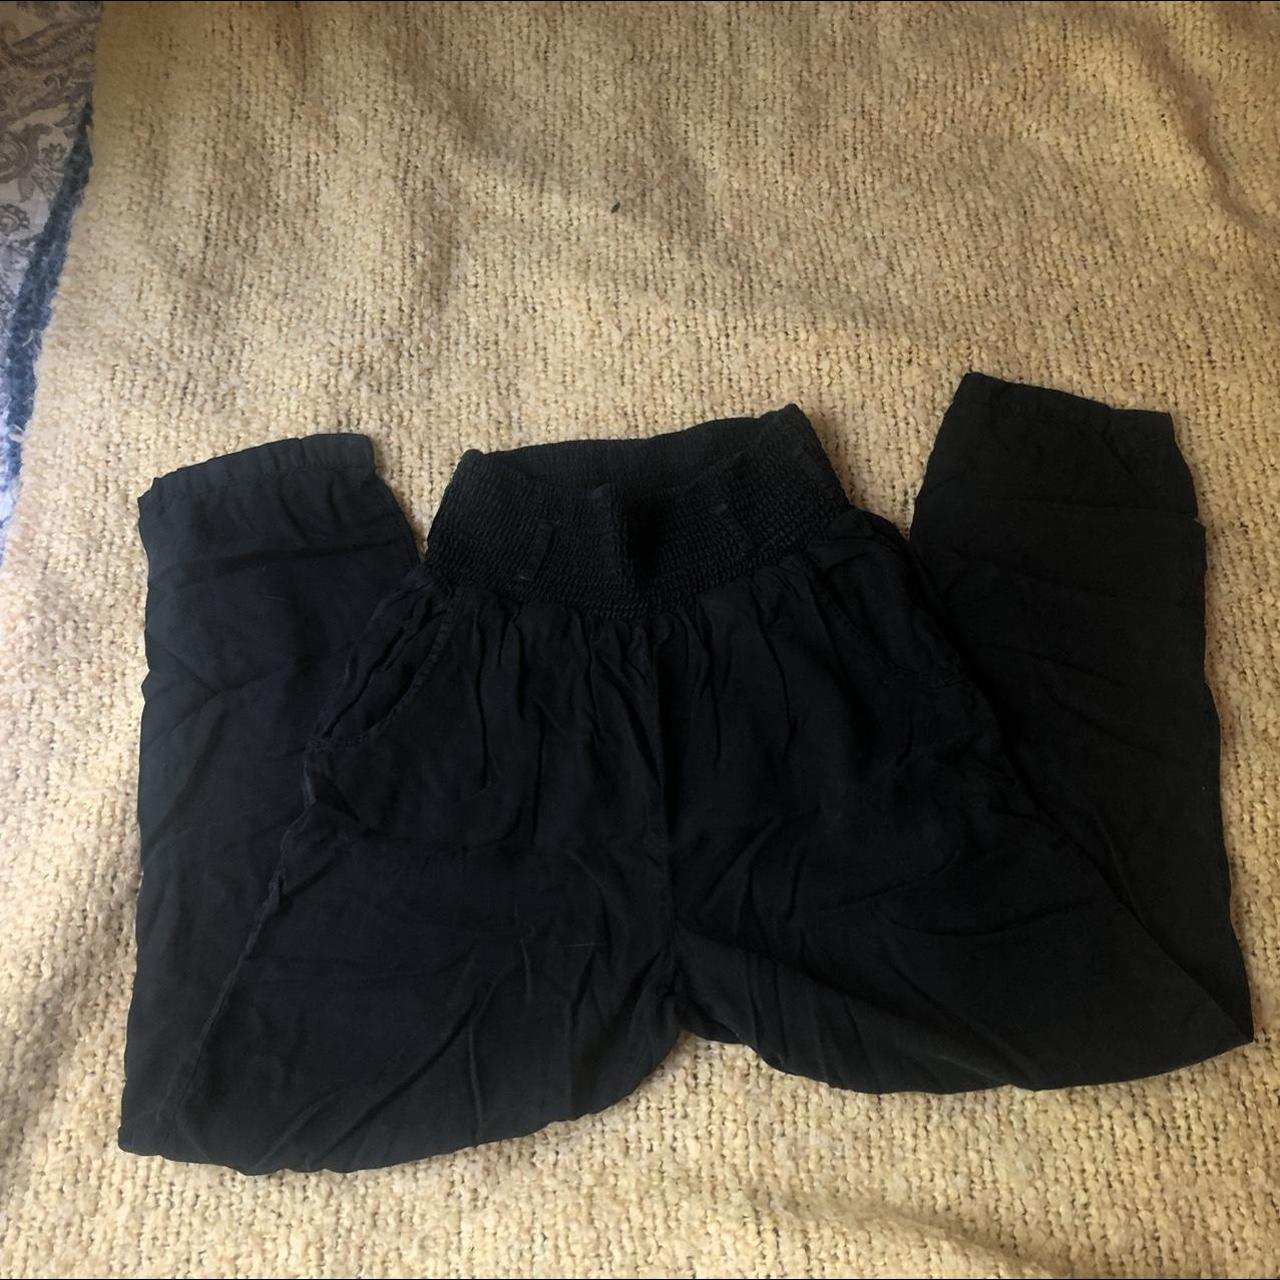 Lucy and Yak Alexa Trousers in black these are a... - Depop